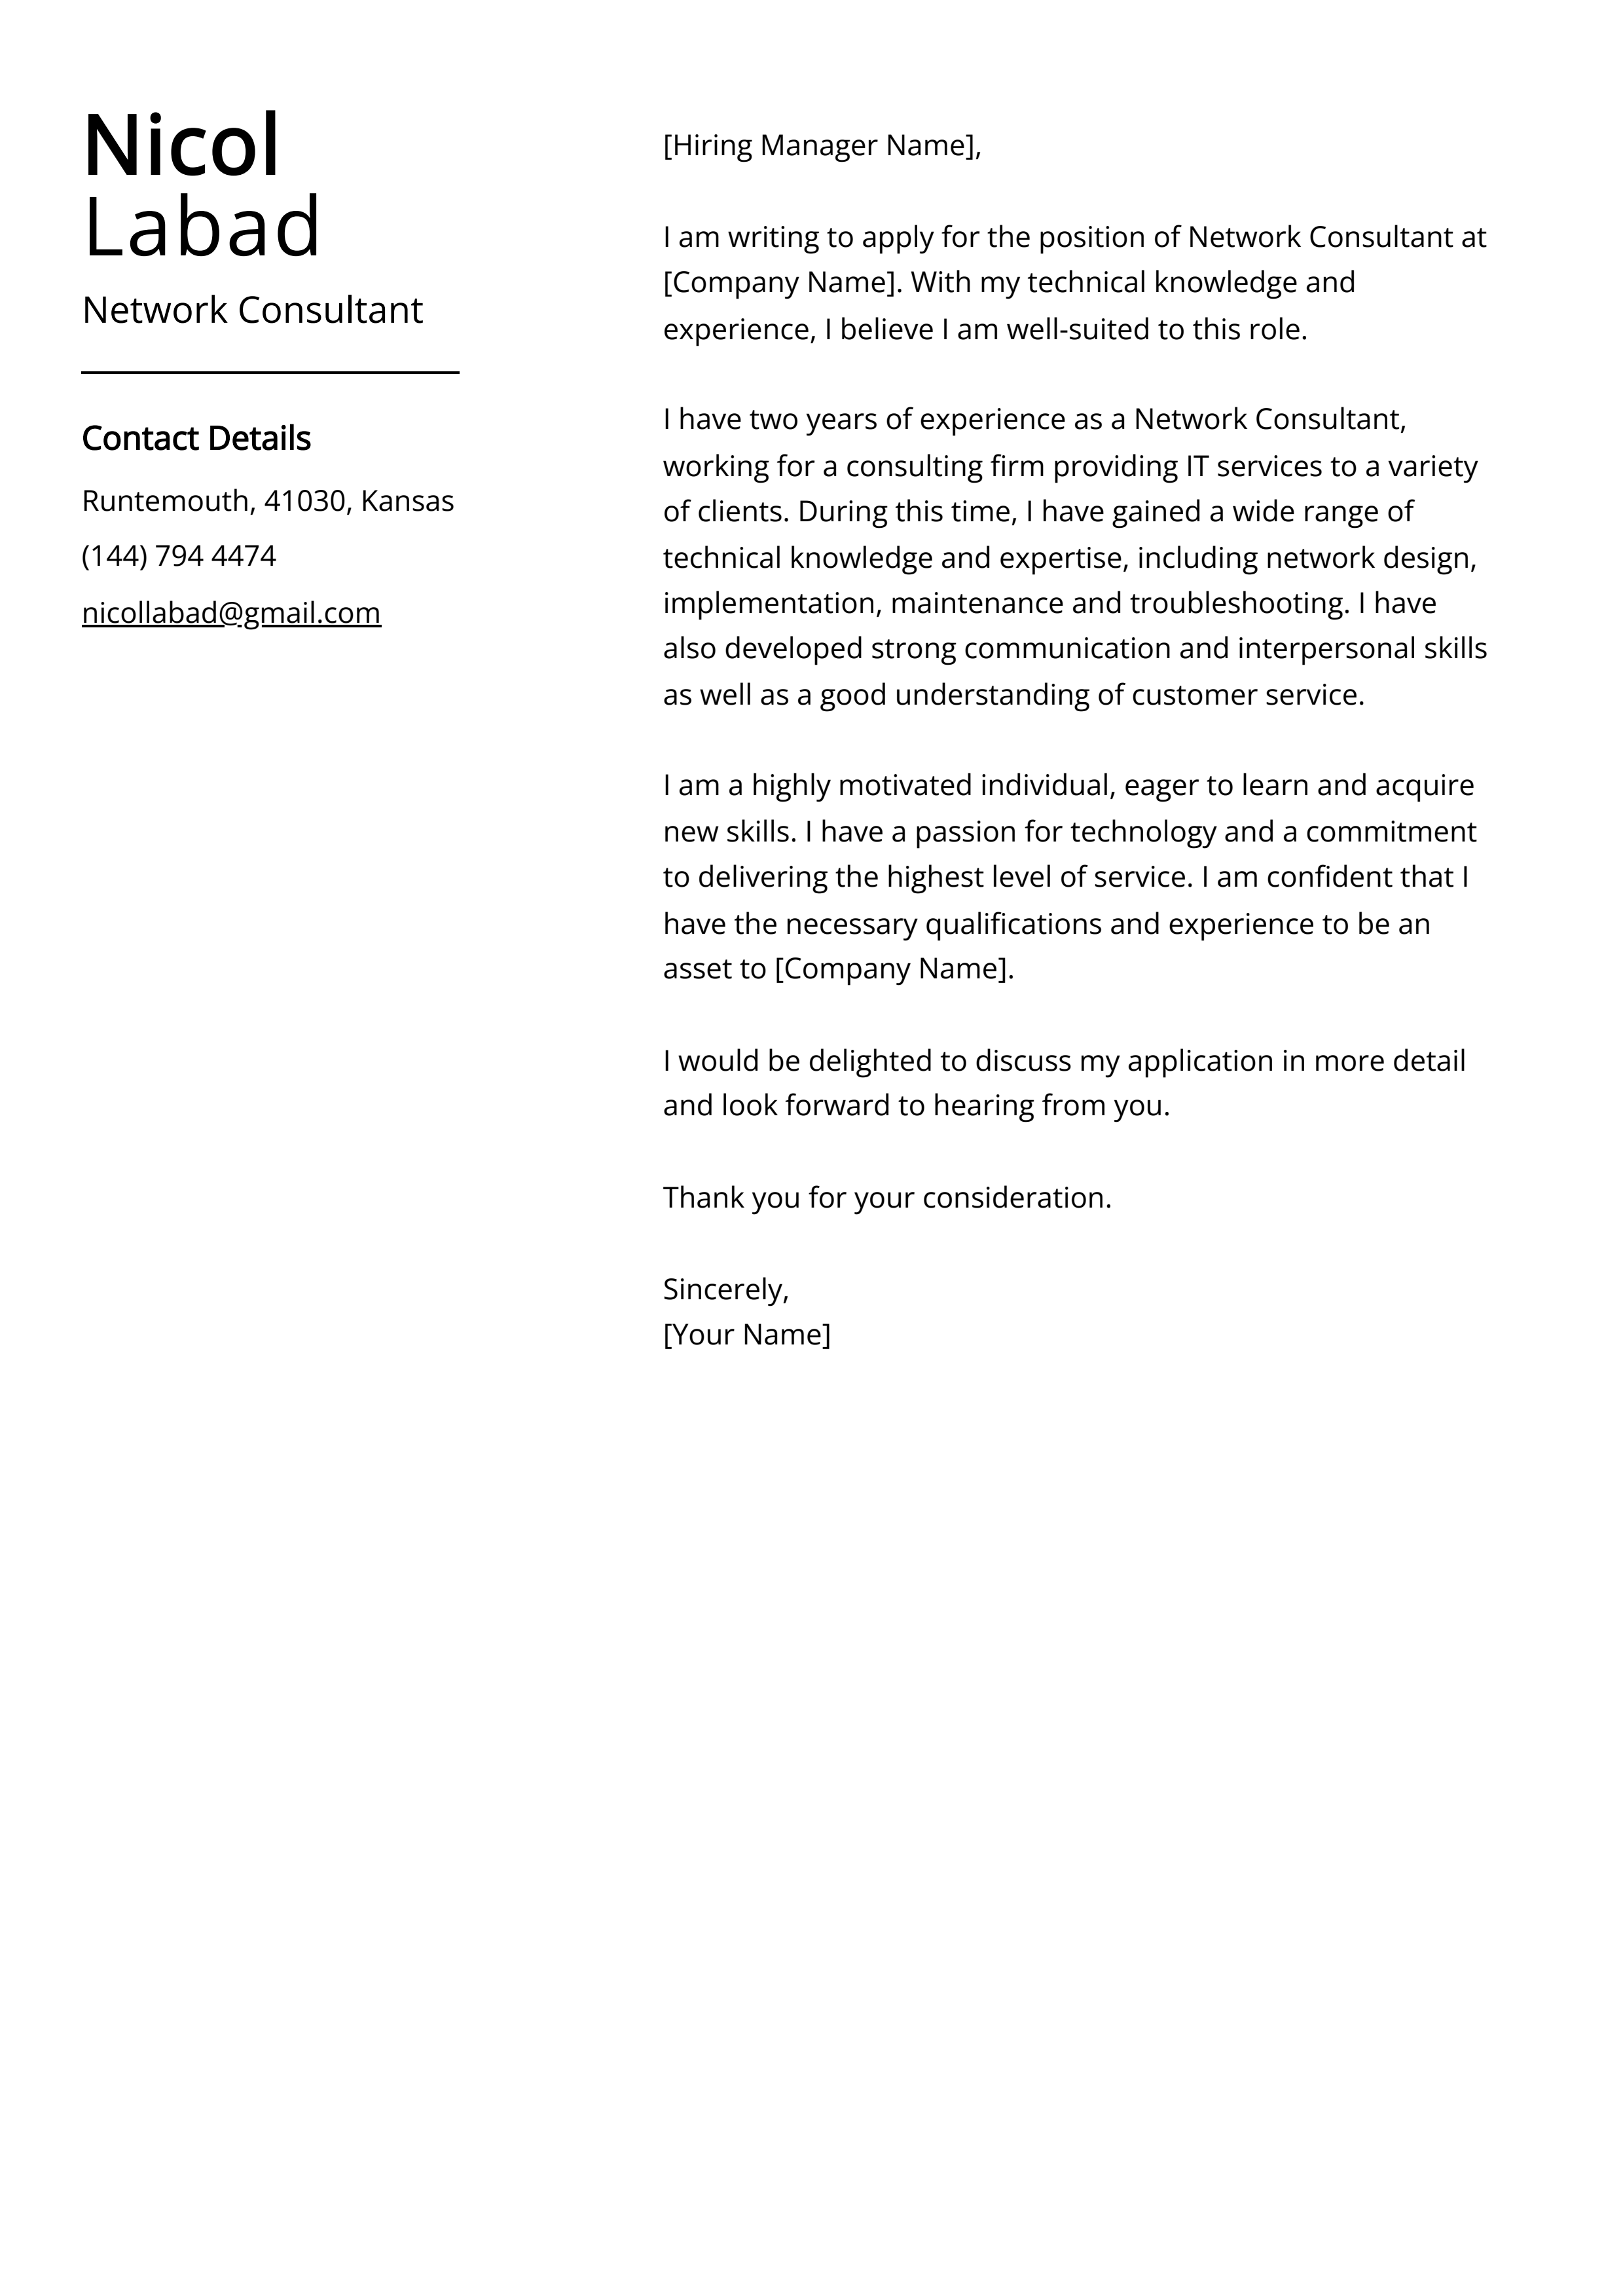 Network Consultant Cover Letter Example